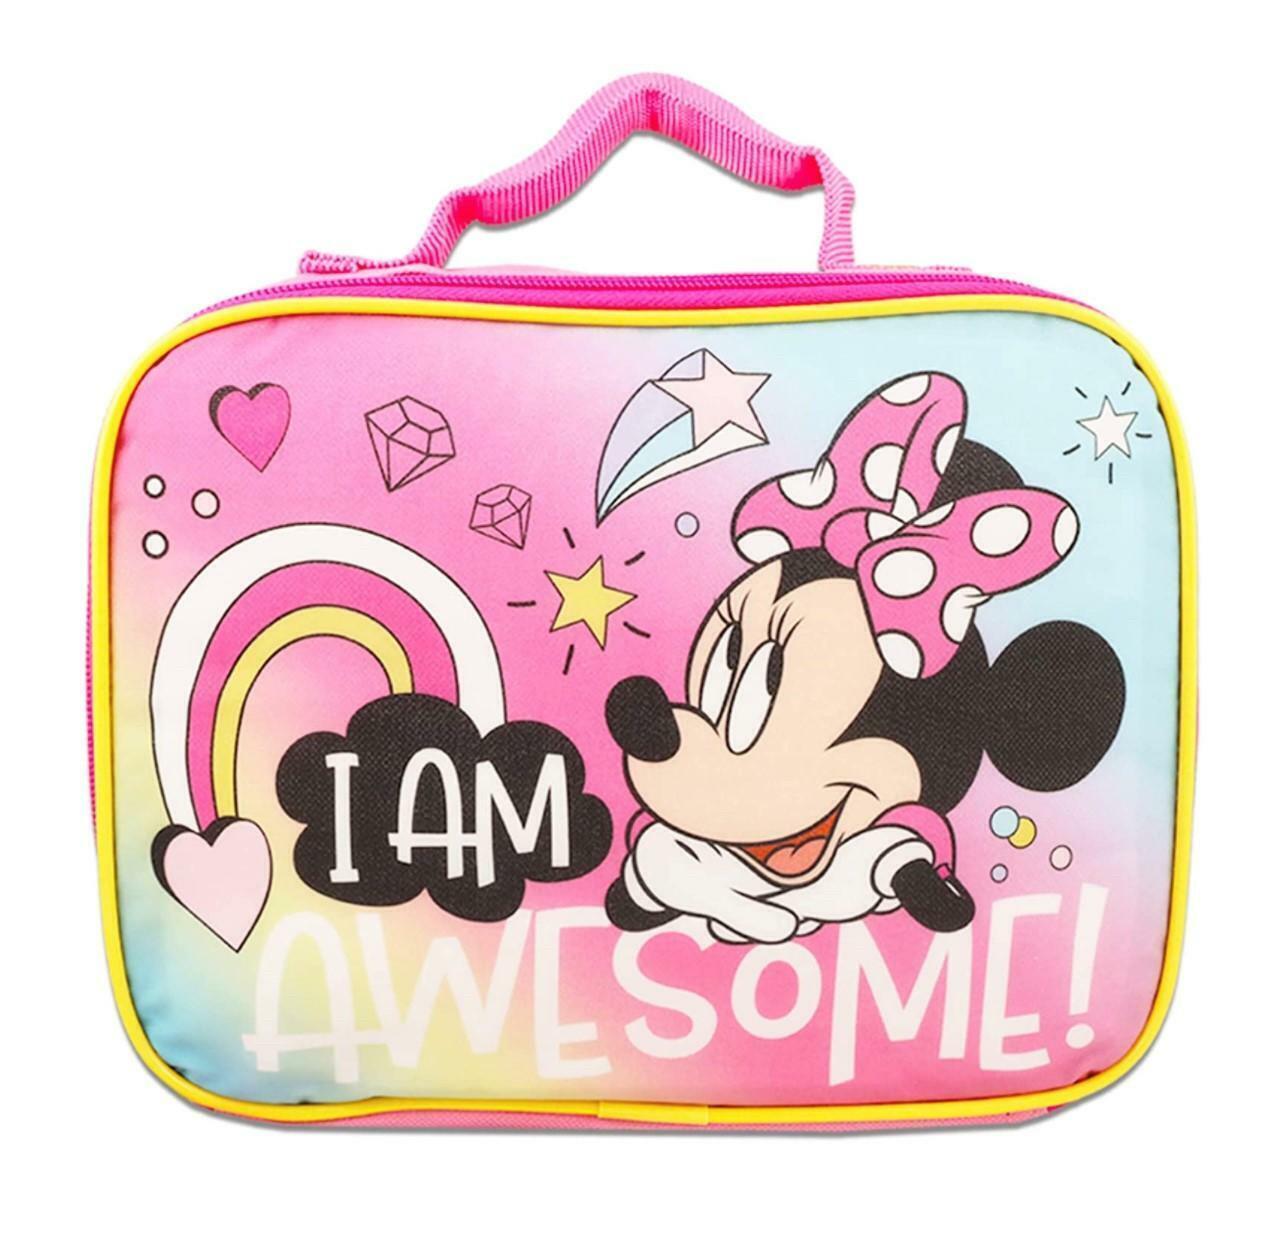 Disney Minnie Mouse 16 Large Backpack School bag With Dettachable lunch box